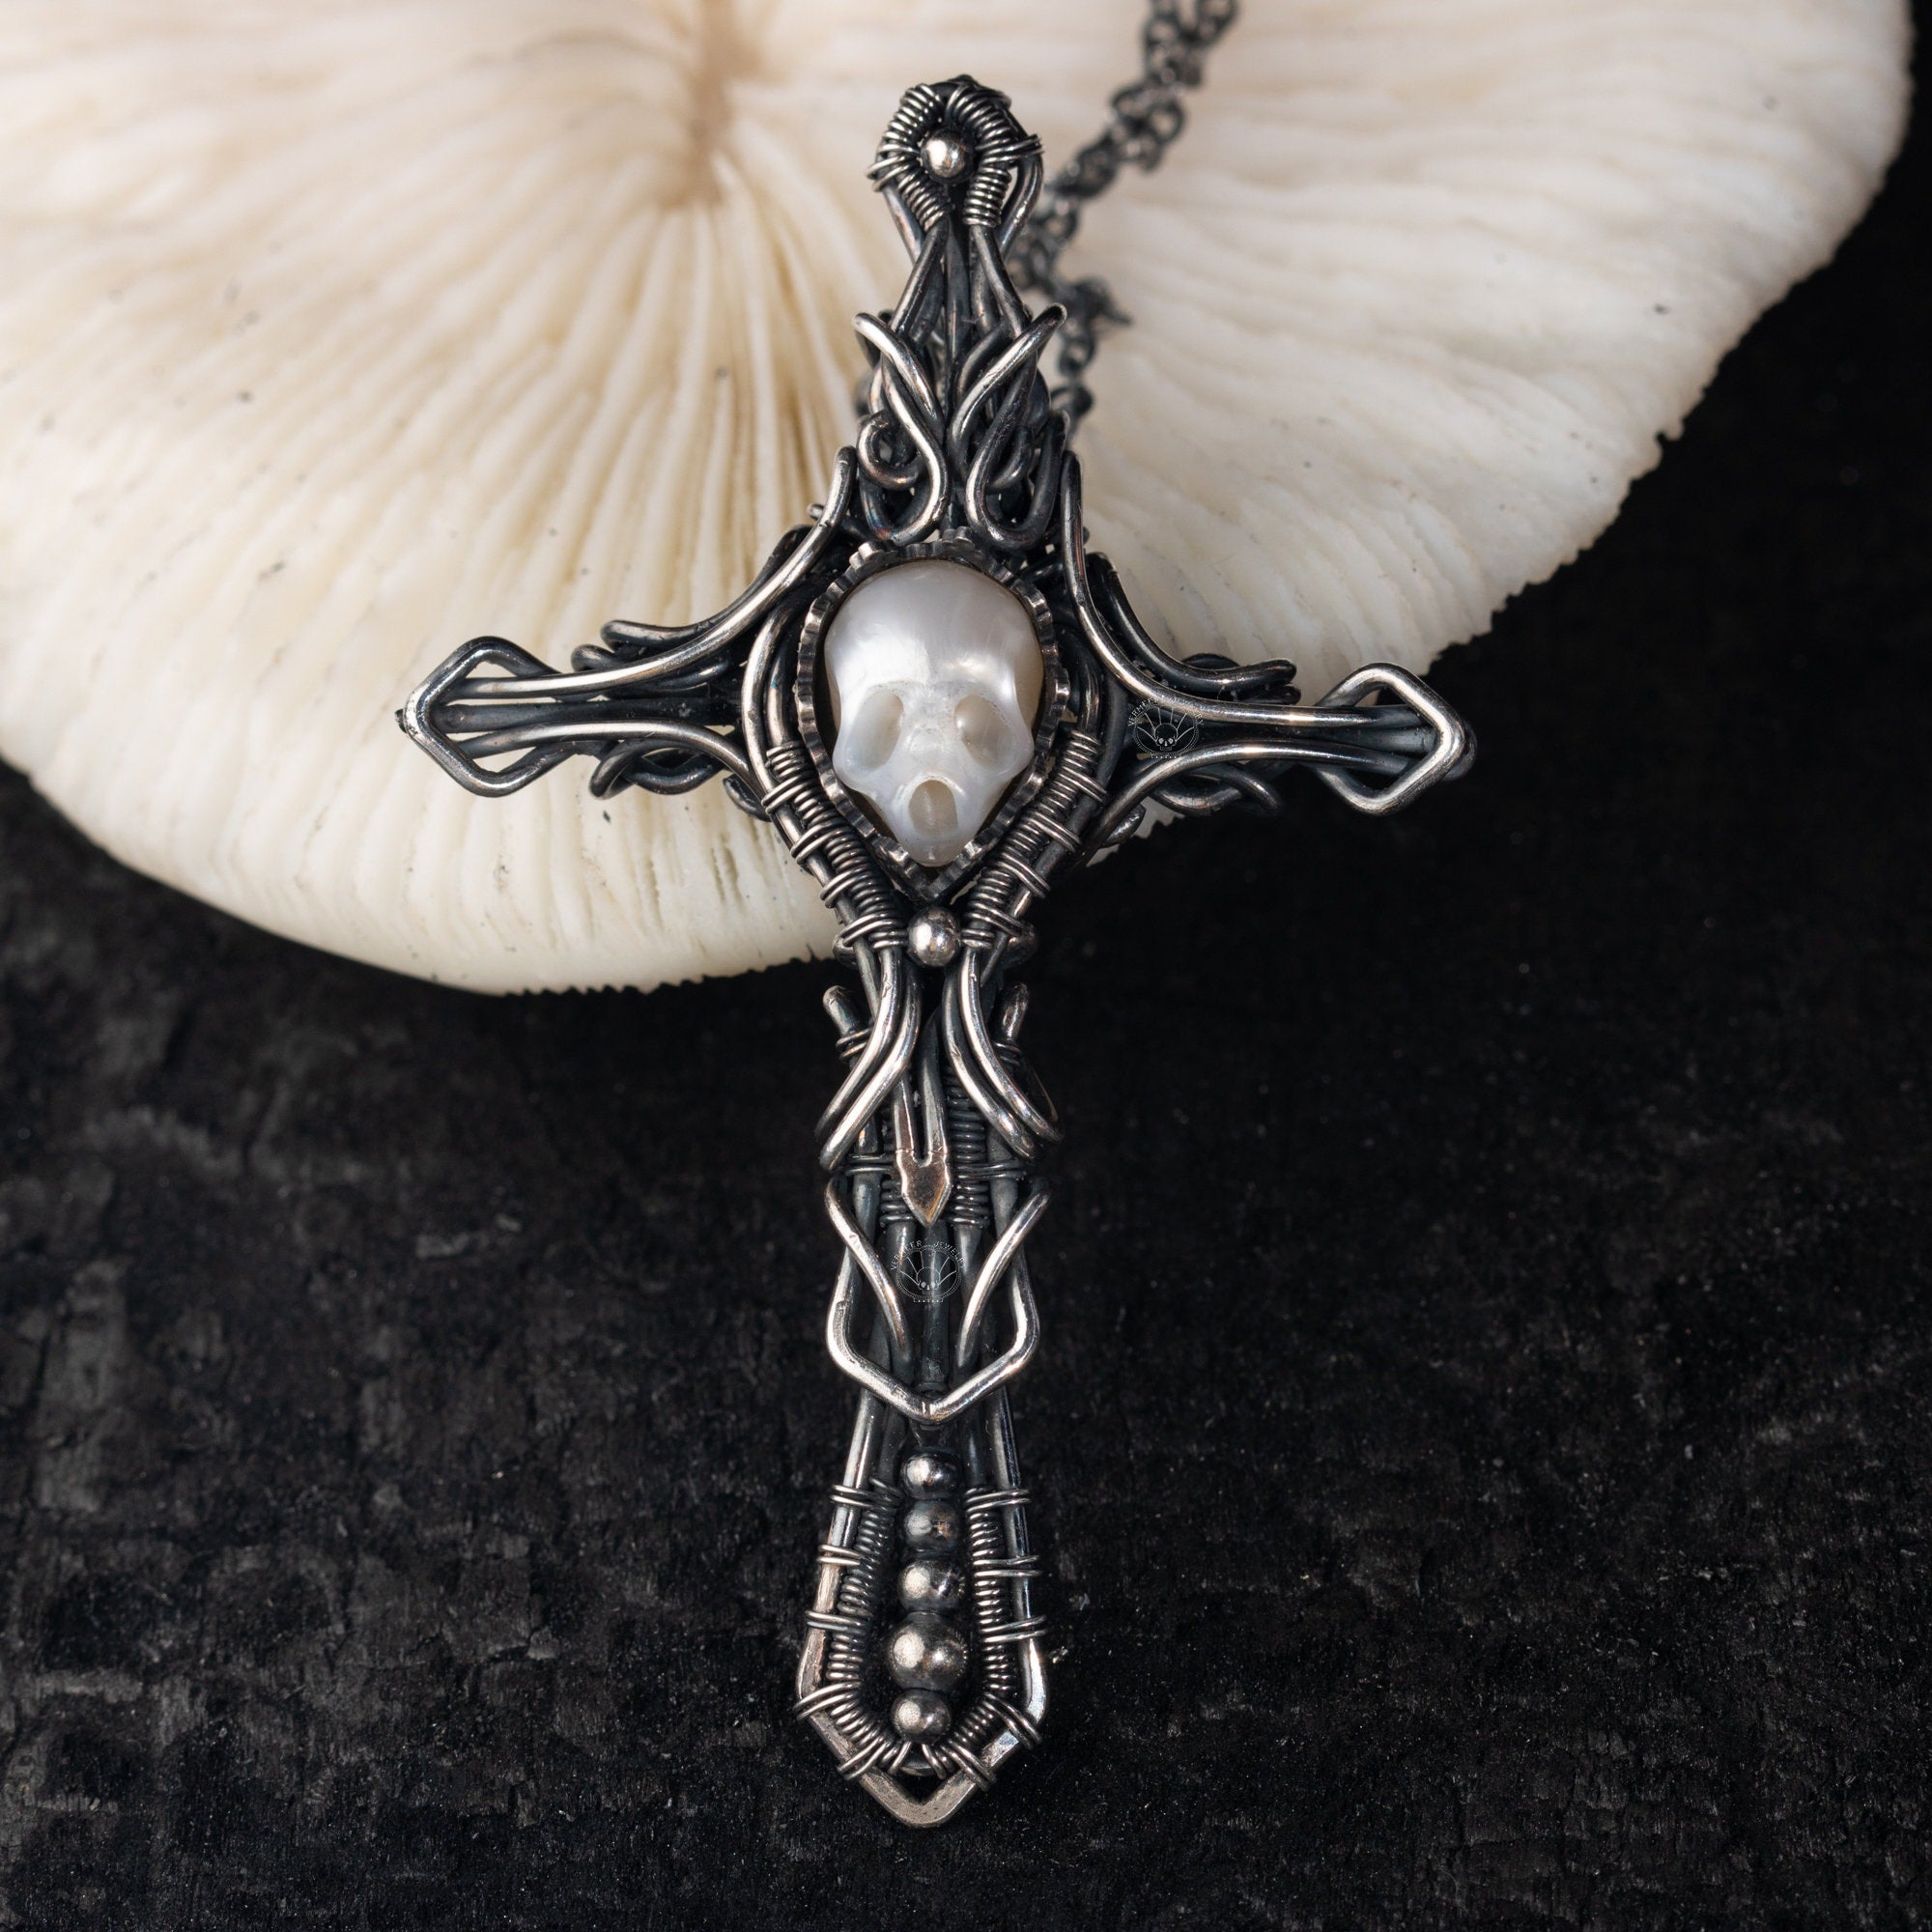 Belief Necklace skull carved pearl S925 silver necklace